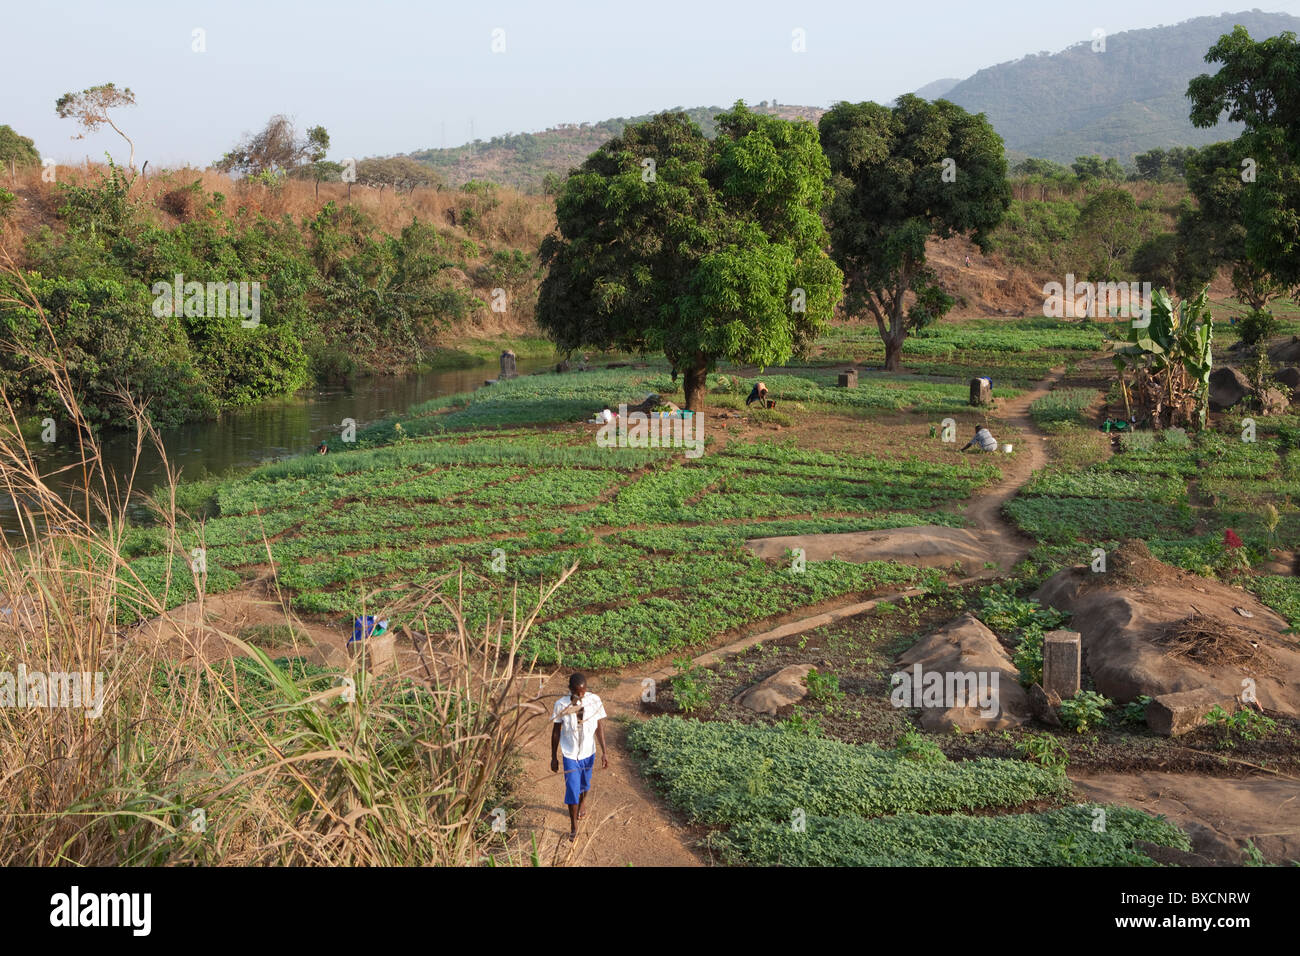 Fertile farmland lies in the town of Hastings in Sierra Leone, West Africa. Stock Photo